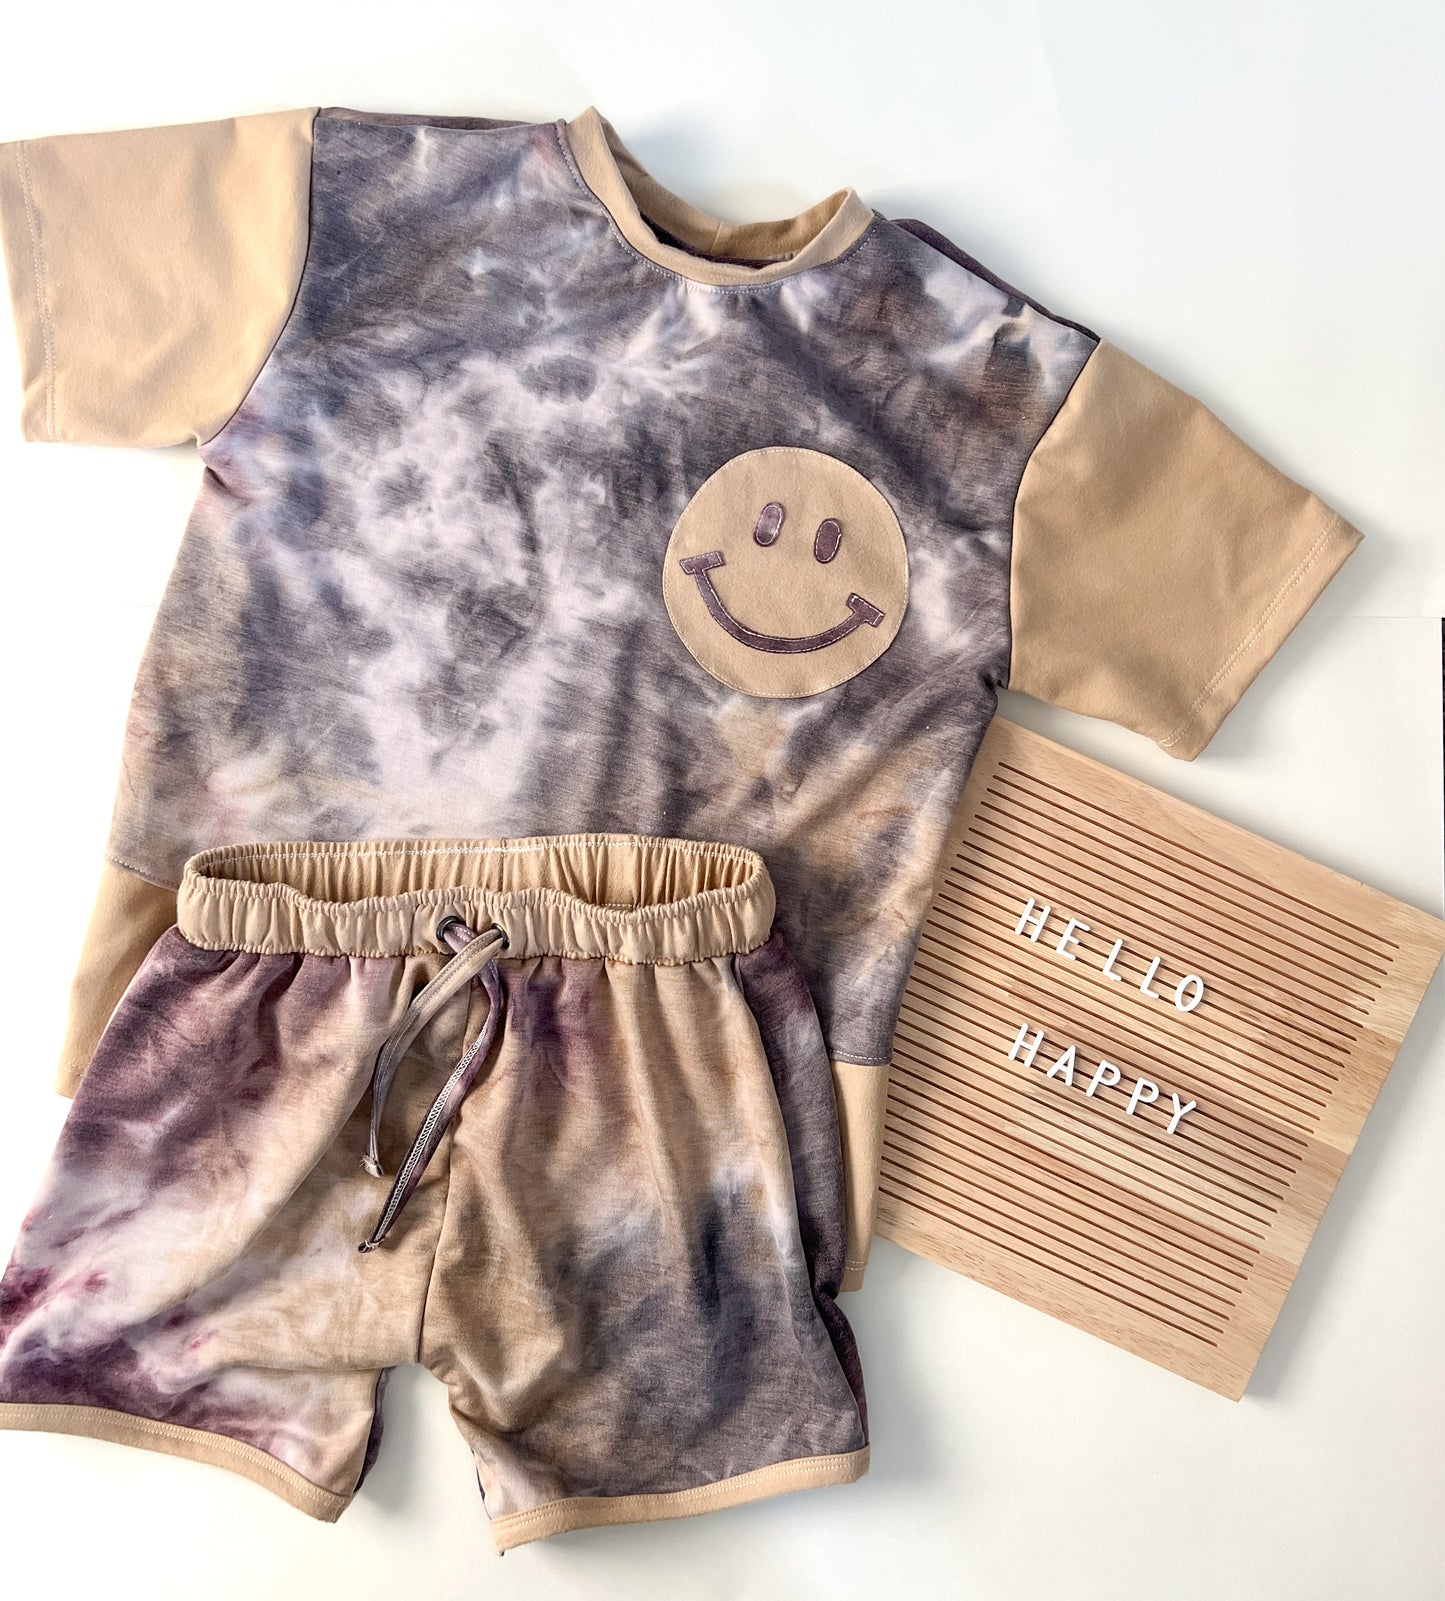 All day play shorts - tie dye